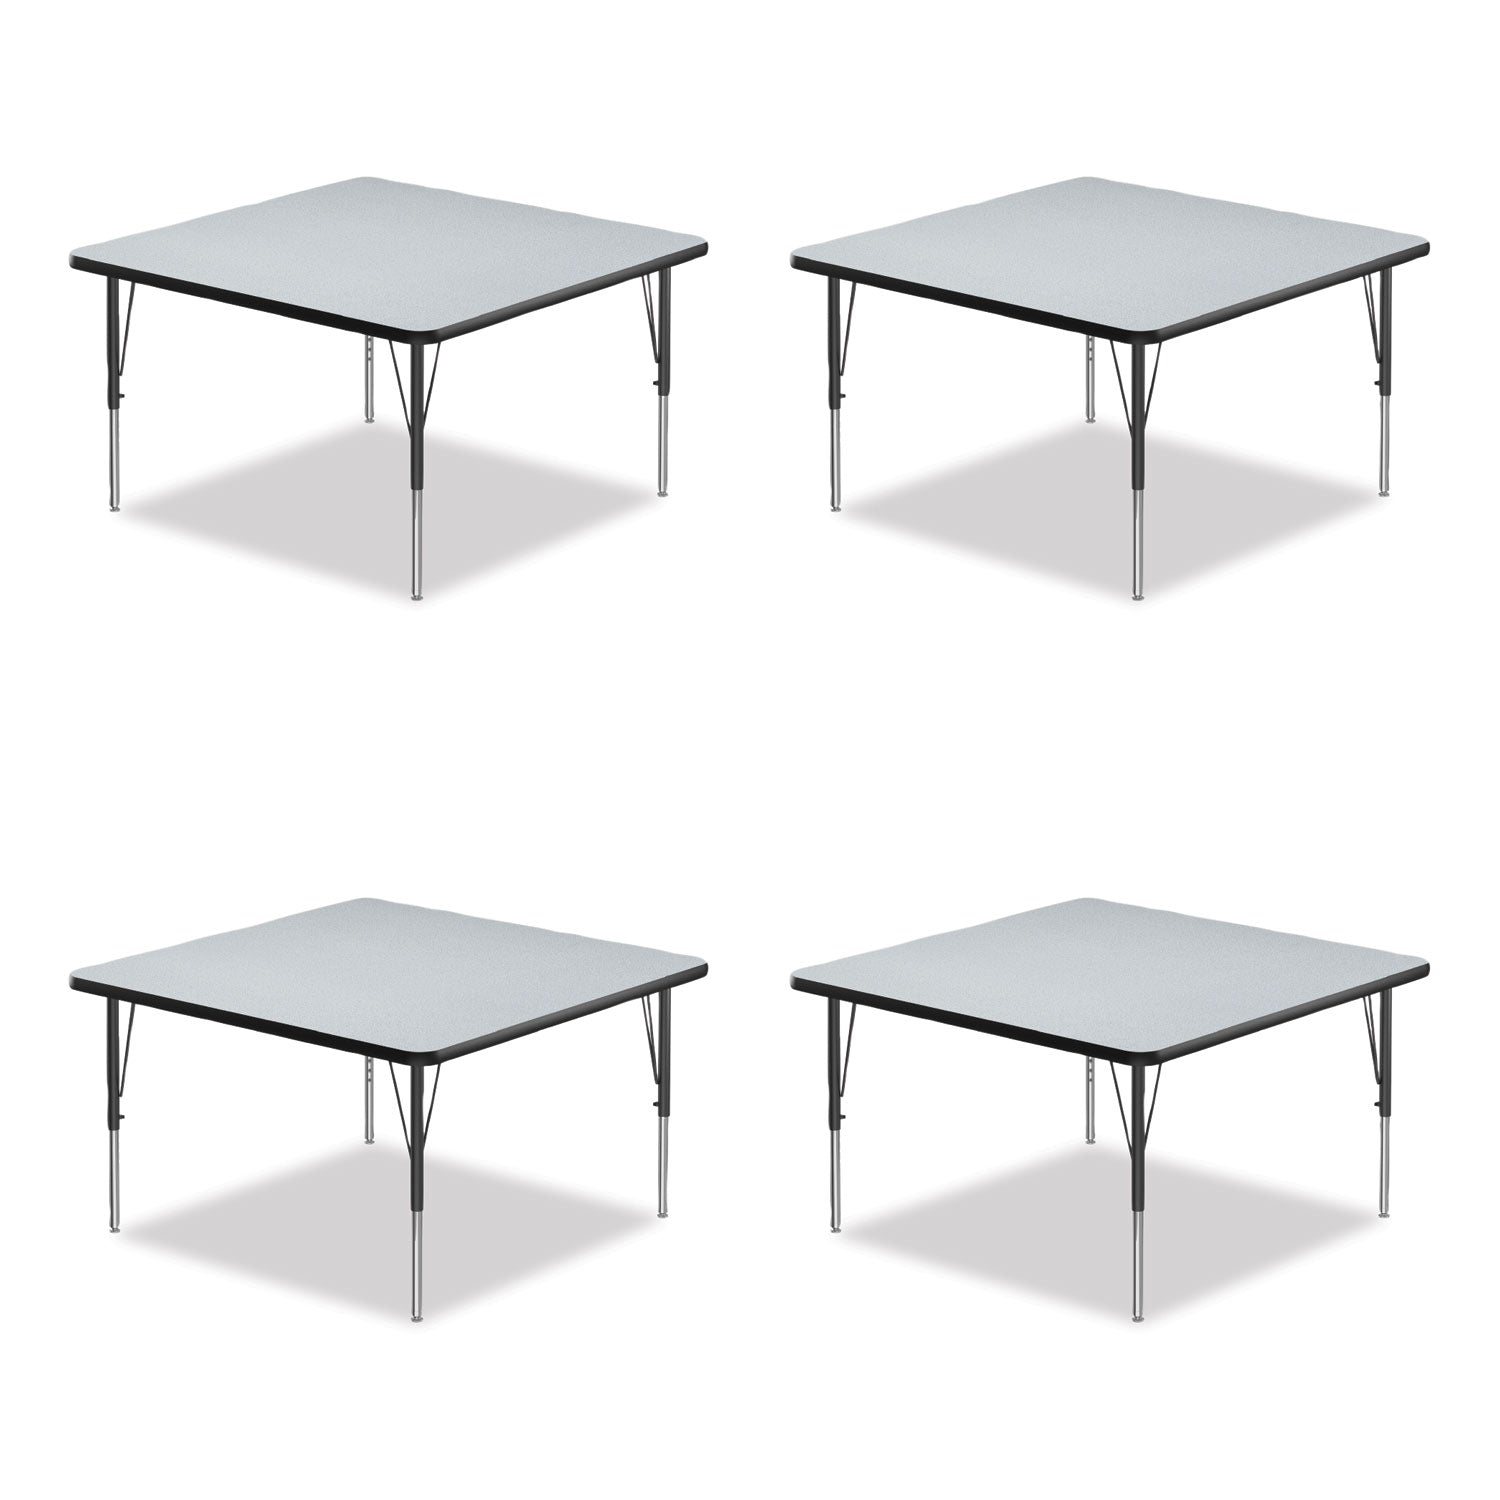 adjustable-activity-tables-square-48-x-48-x-19-to-29-gray-top-black-legs-4-pallet-ships-in-4-6-business-days_crl4848tf1595k4 - 1